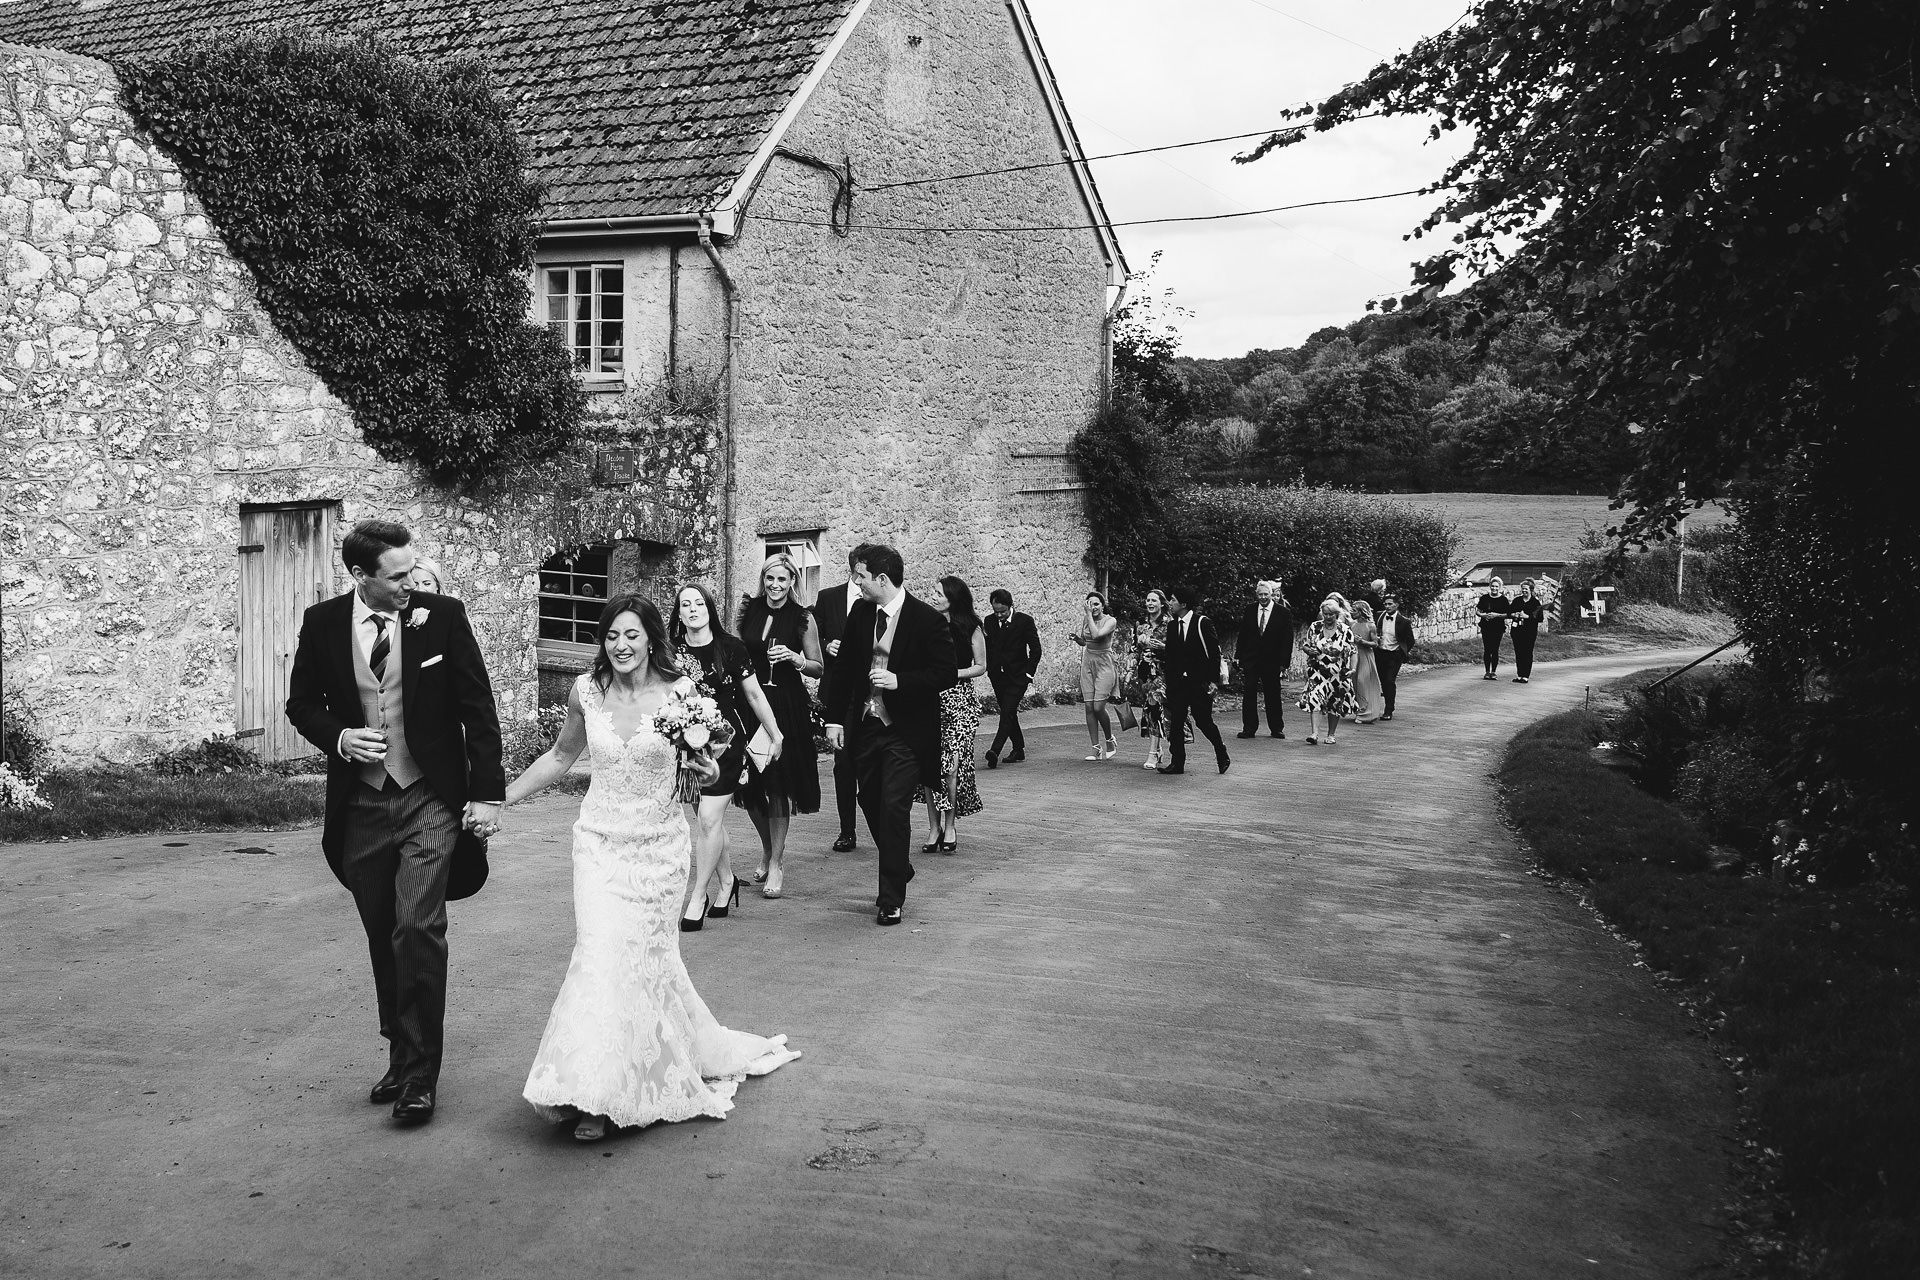 Bride and groom leading wedding guests up a beautiful country lane towards a stone barn